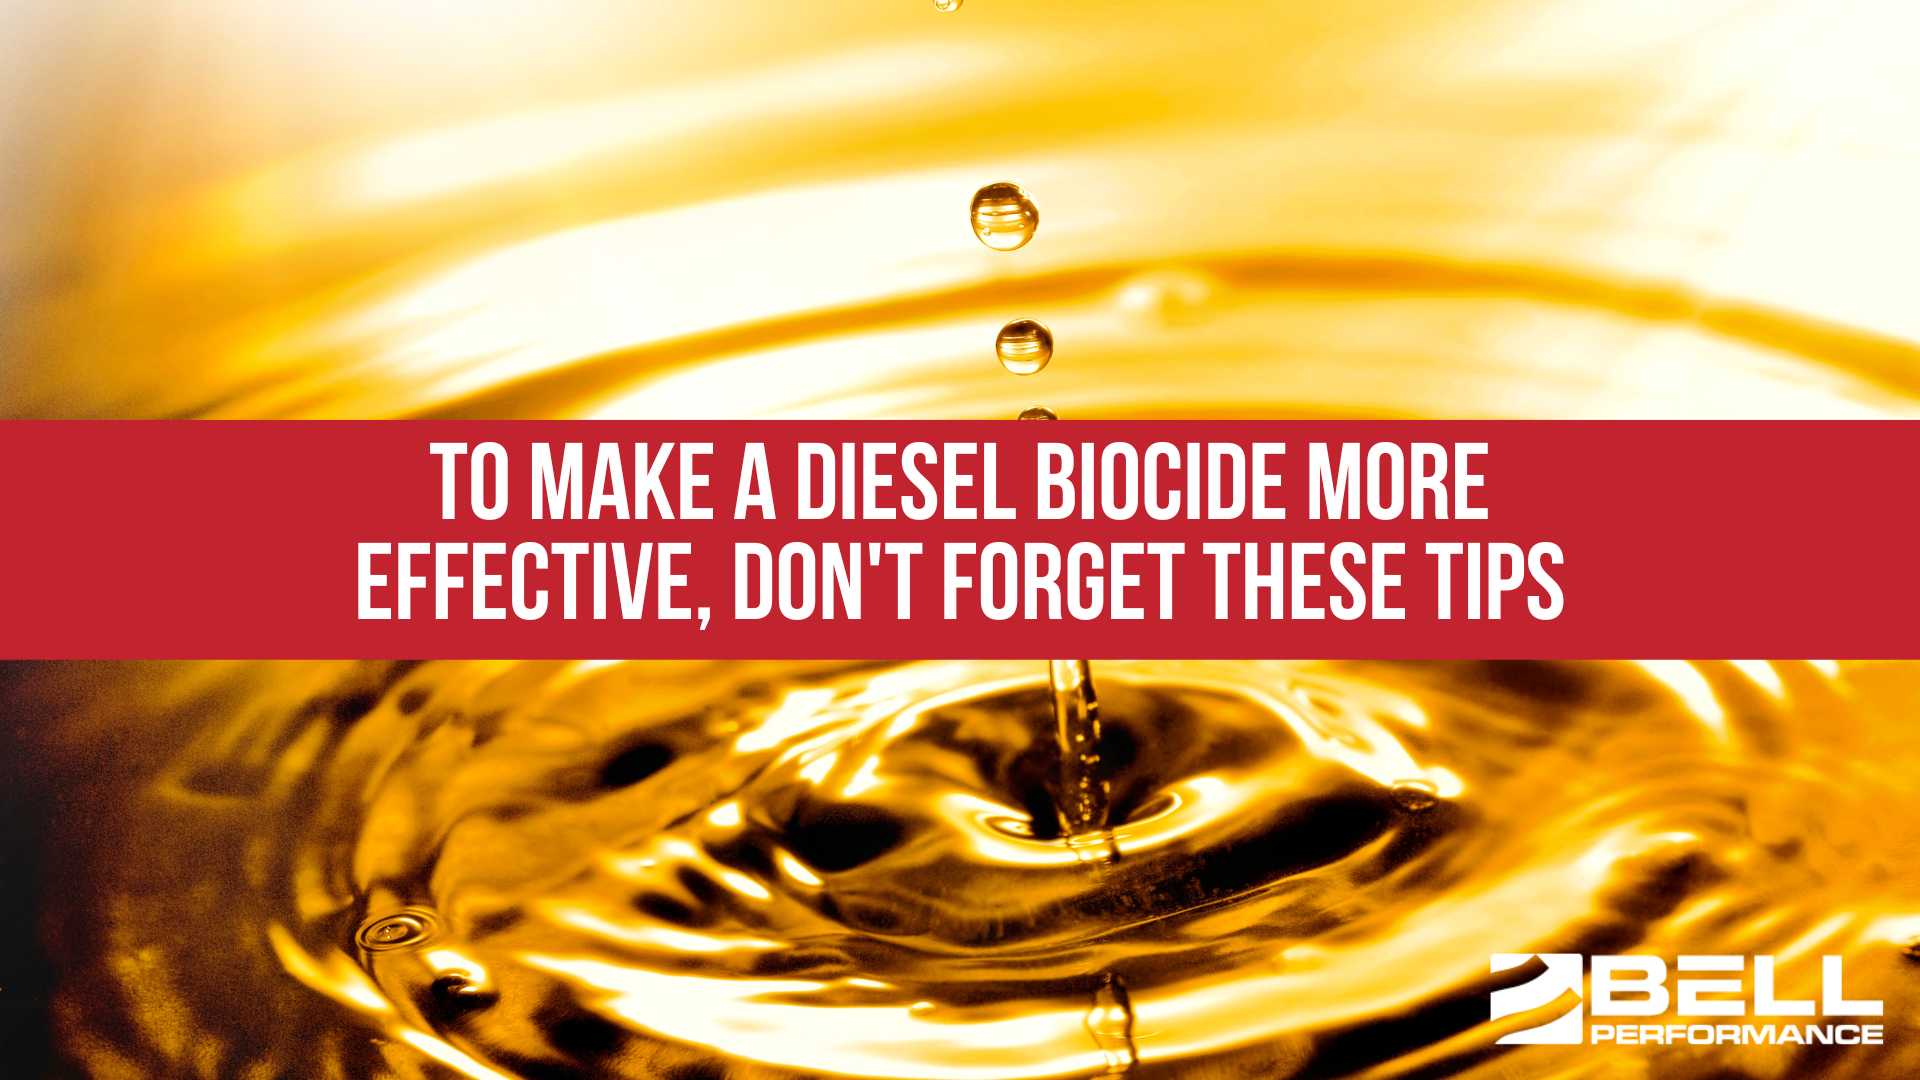 To Make a Diesel Biocide More Effective, Don't Forget These Tips